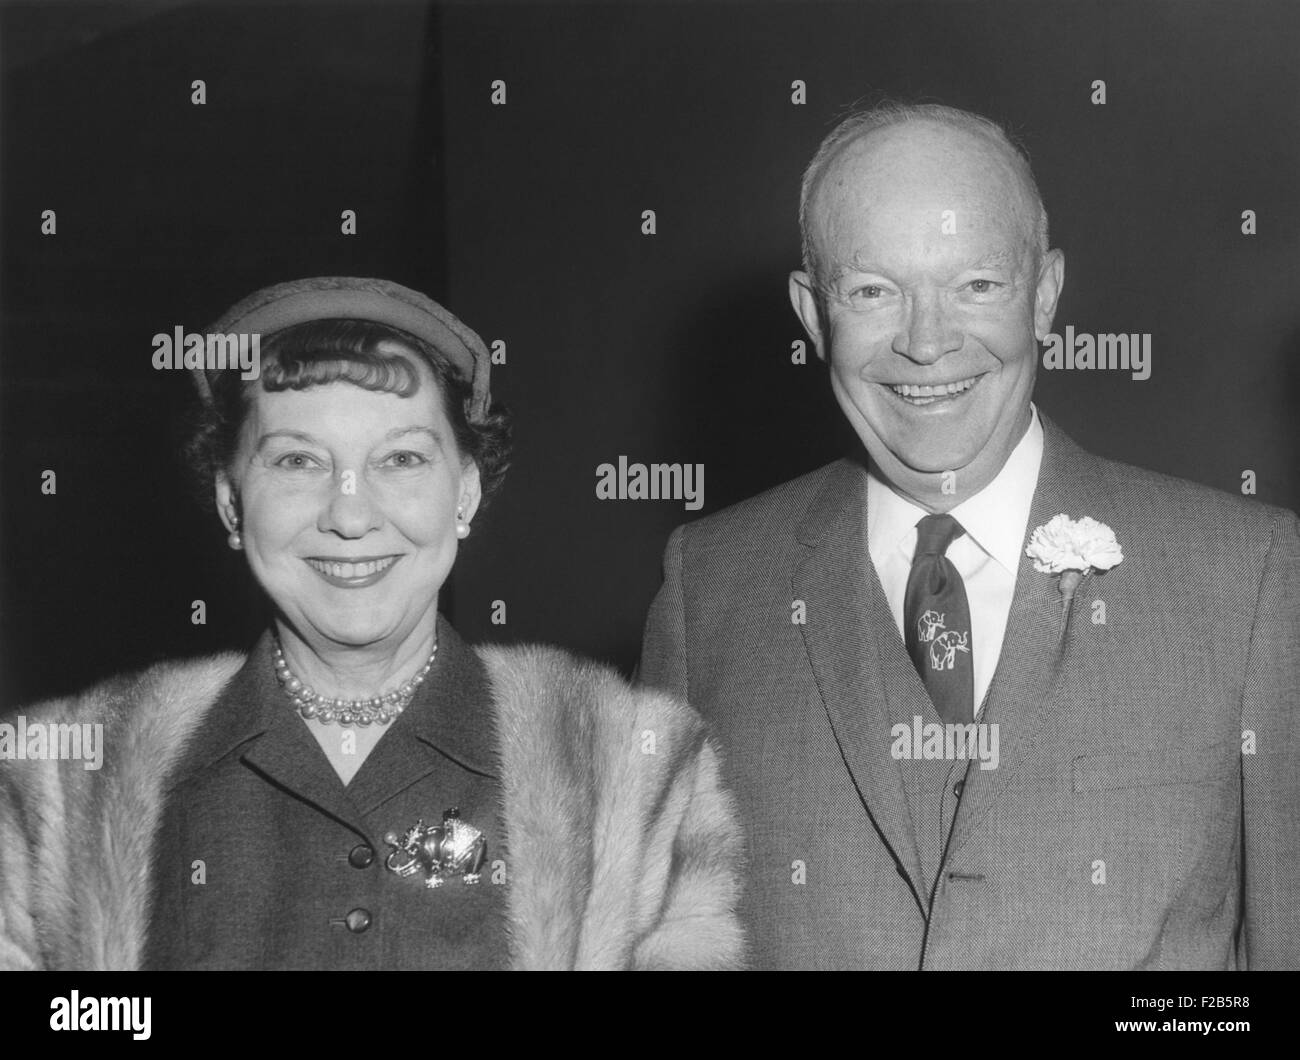 President Dwight and First Lady Mamie Eisenhower. Mamie wears an 'elephant' pin, and the President has an 'elephant' tie. Oct. 14, 1958. - (BSLOC 2014 16 84) Stock Photo